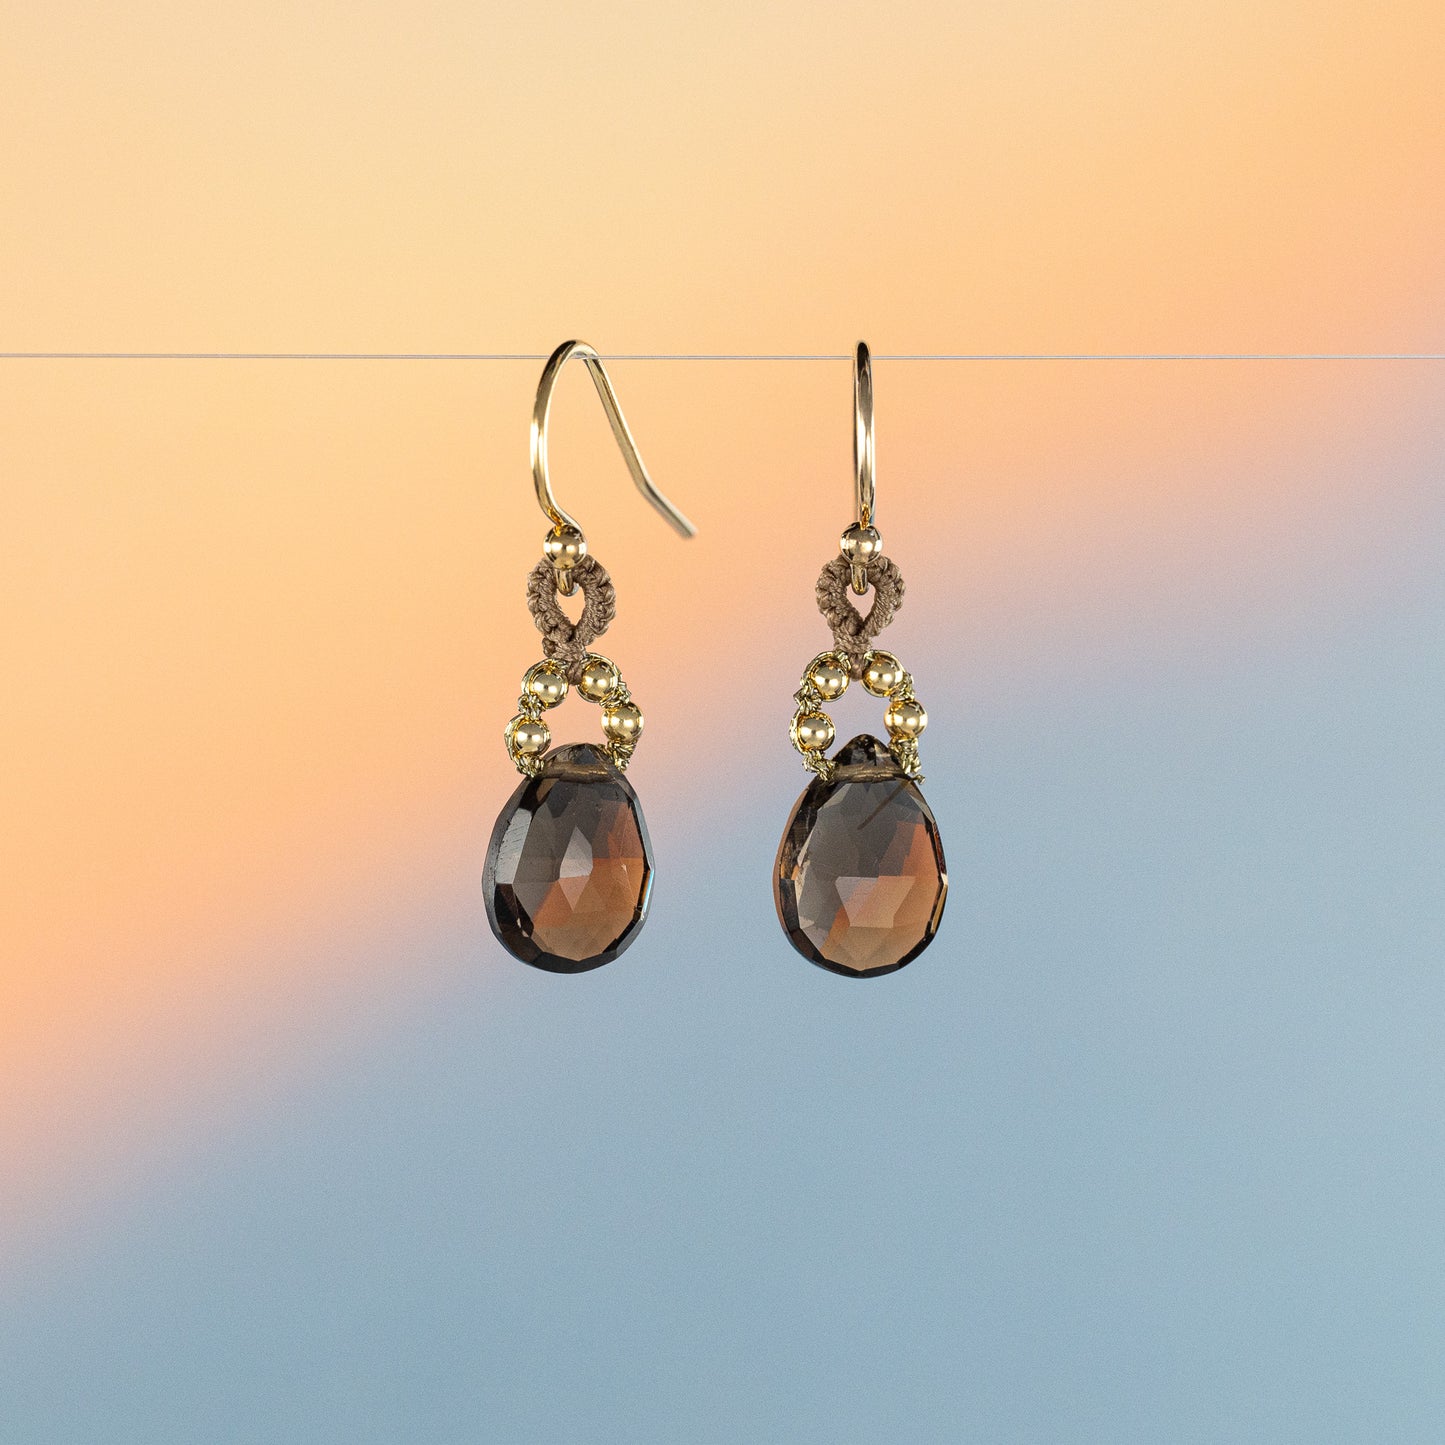 Load image into Gallery viewer, Danielle Welmond Smokey Quartz Drop Earrings with Coordinating Taupe Silk Cord
